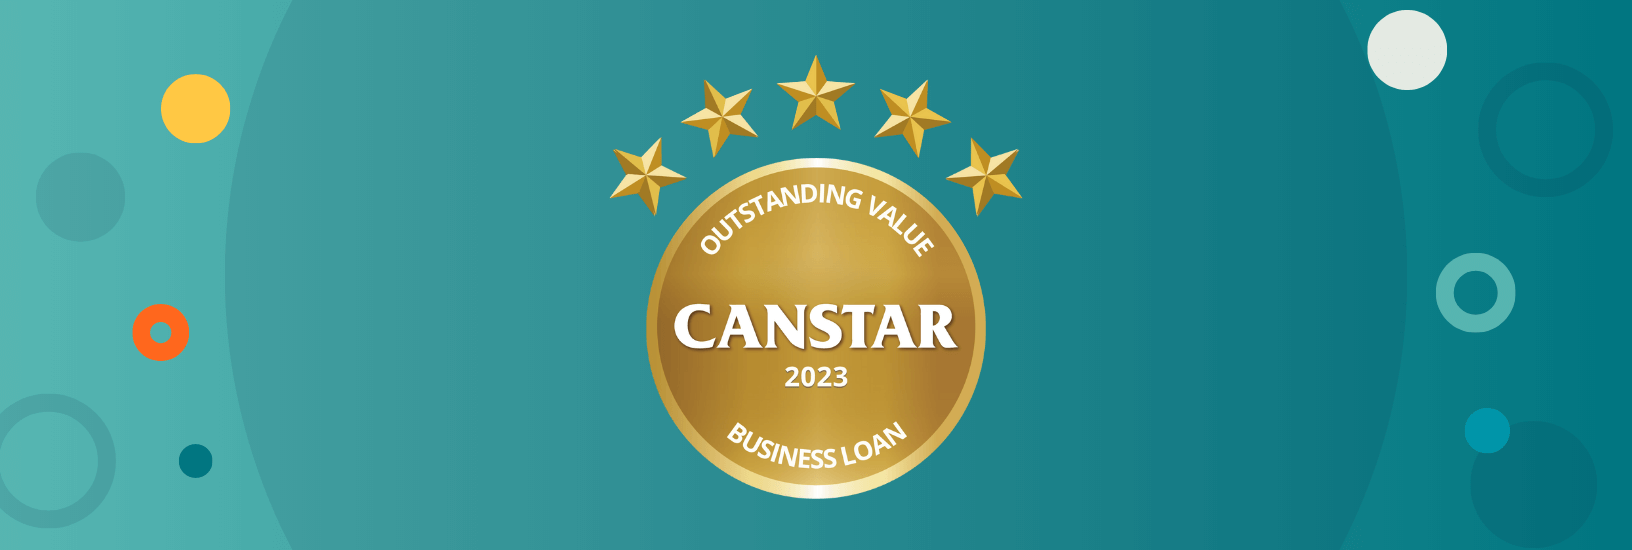 Canstar Business Loans Star Ratings and Awards Logo